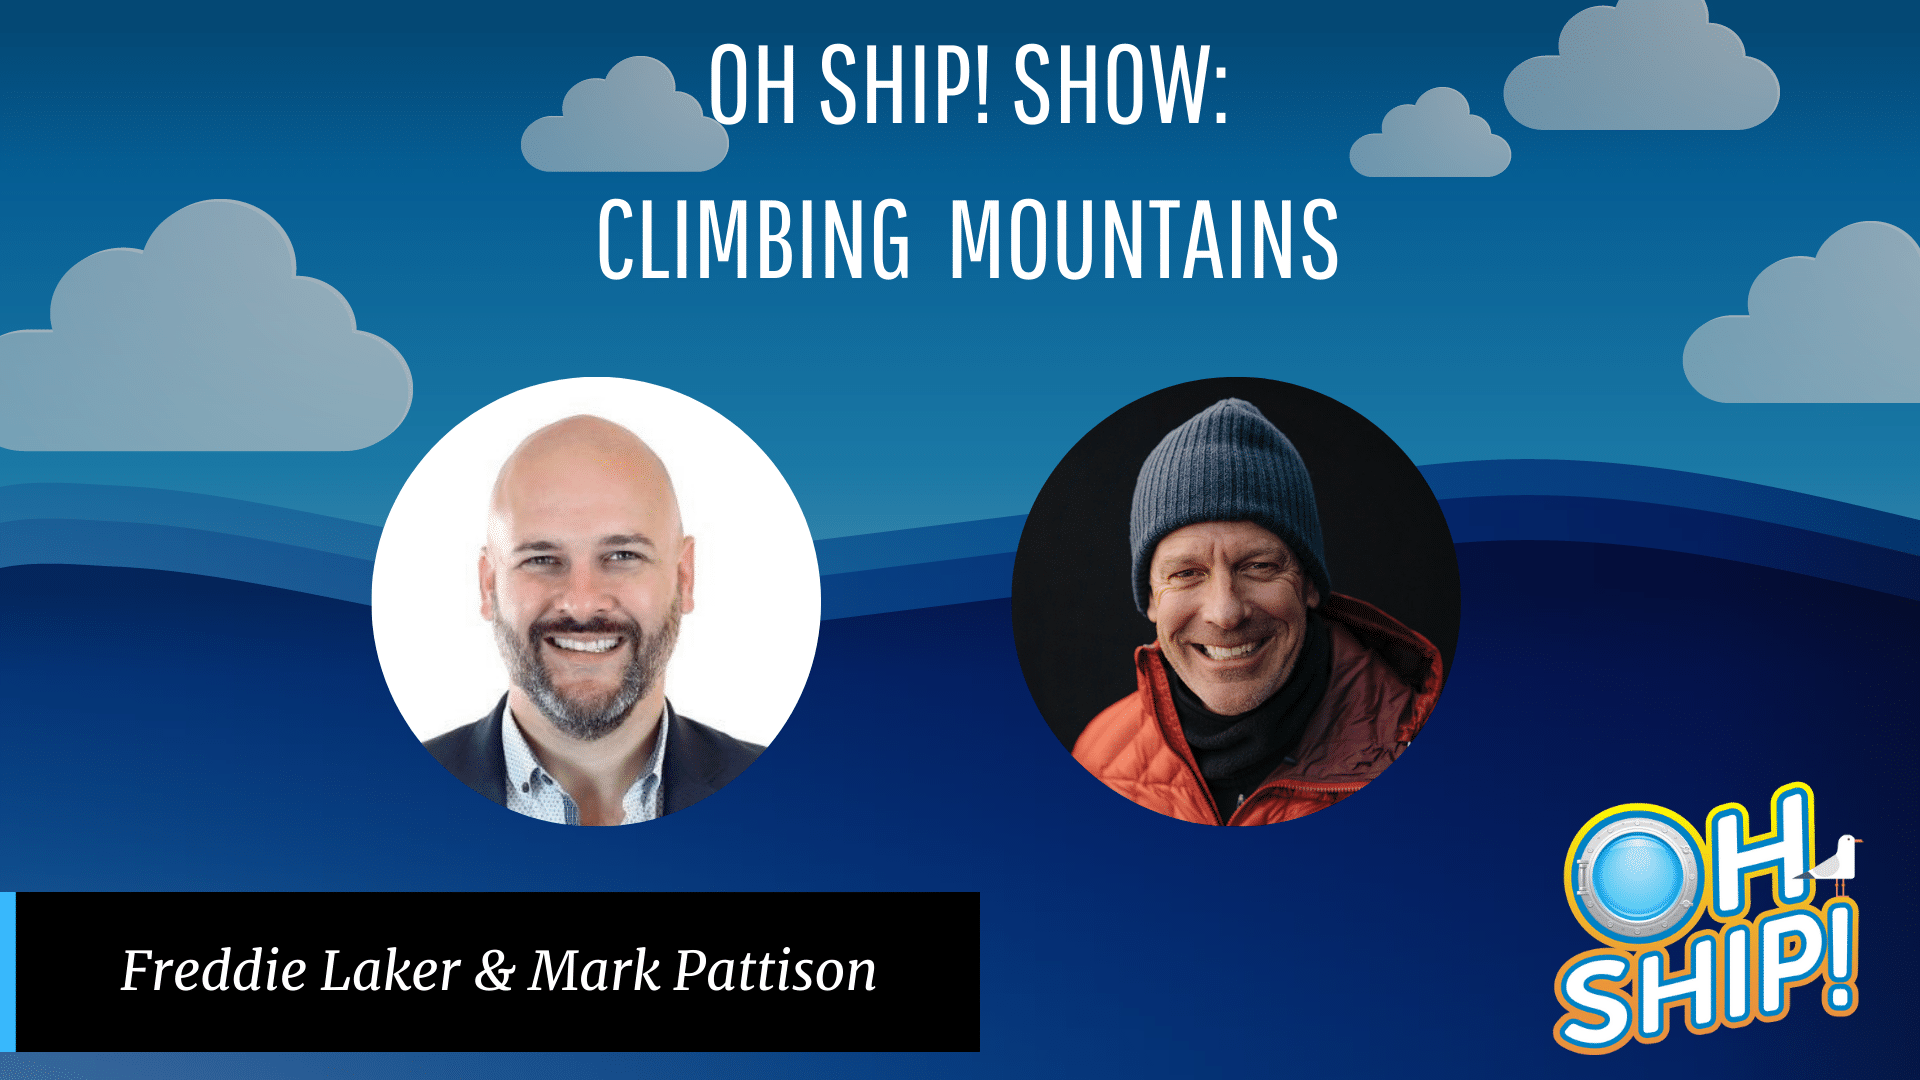 Banner for the “Oh Ship! Show” featuring Freddie Laker and Mark Pattison against a blue sky with clouds. Text reads "CLIMBING MOUNTAINS". Freddie has a shaved head and beard, Mark wears a beanie. The "OH SHIP!" logo is in the bottom right corner, highlighting their journey to surmounting the Seven Summits.